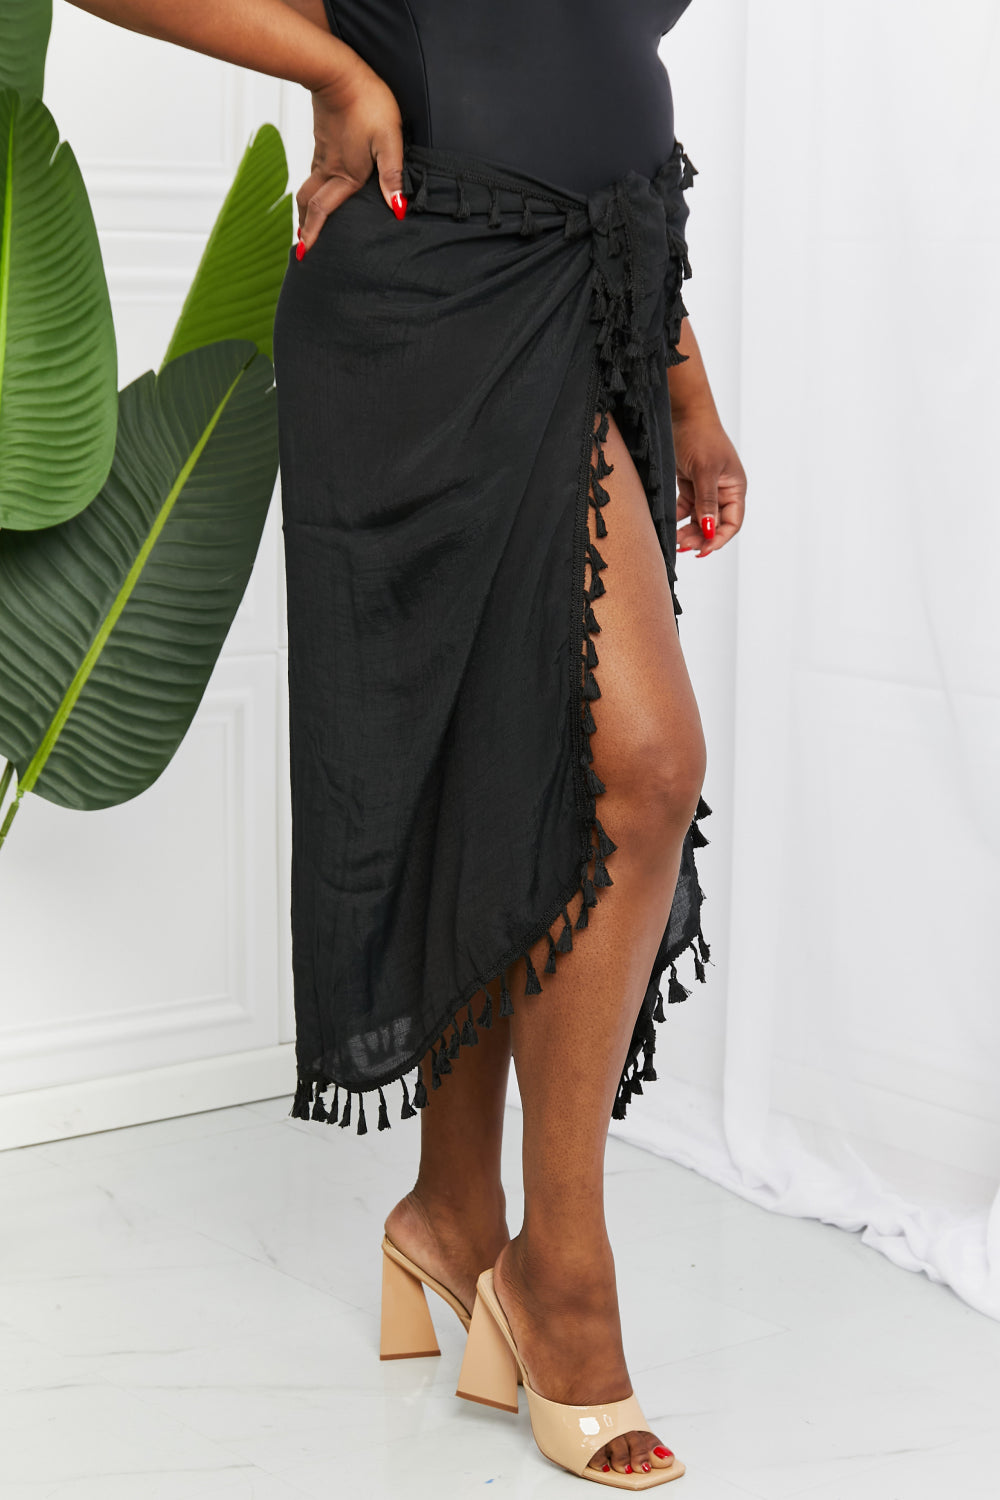 Marina West Swim Relax and Refresh Tassel Wrap Cover-Up in Black